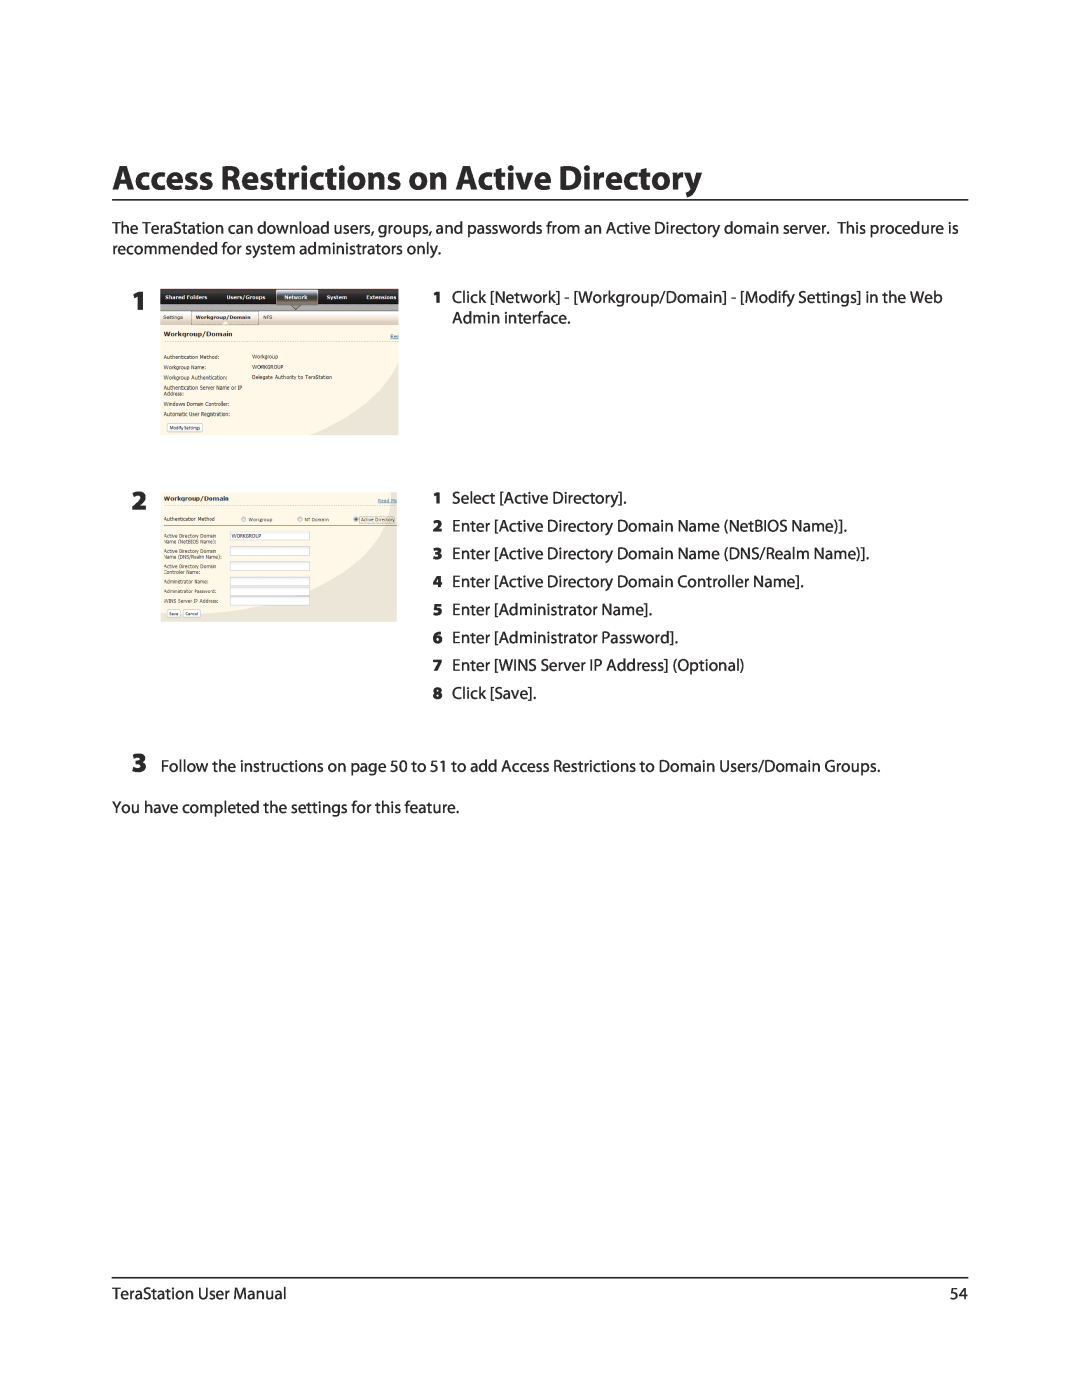 Buffalo Technology TS-RXL Access Restrictions on Active Directory, Admin interface, Select Active Directory, Click Save 